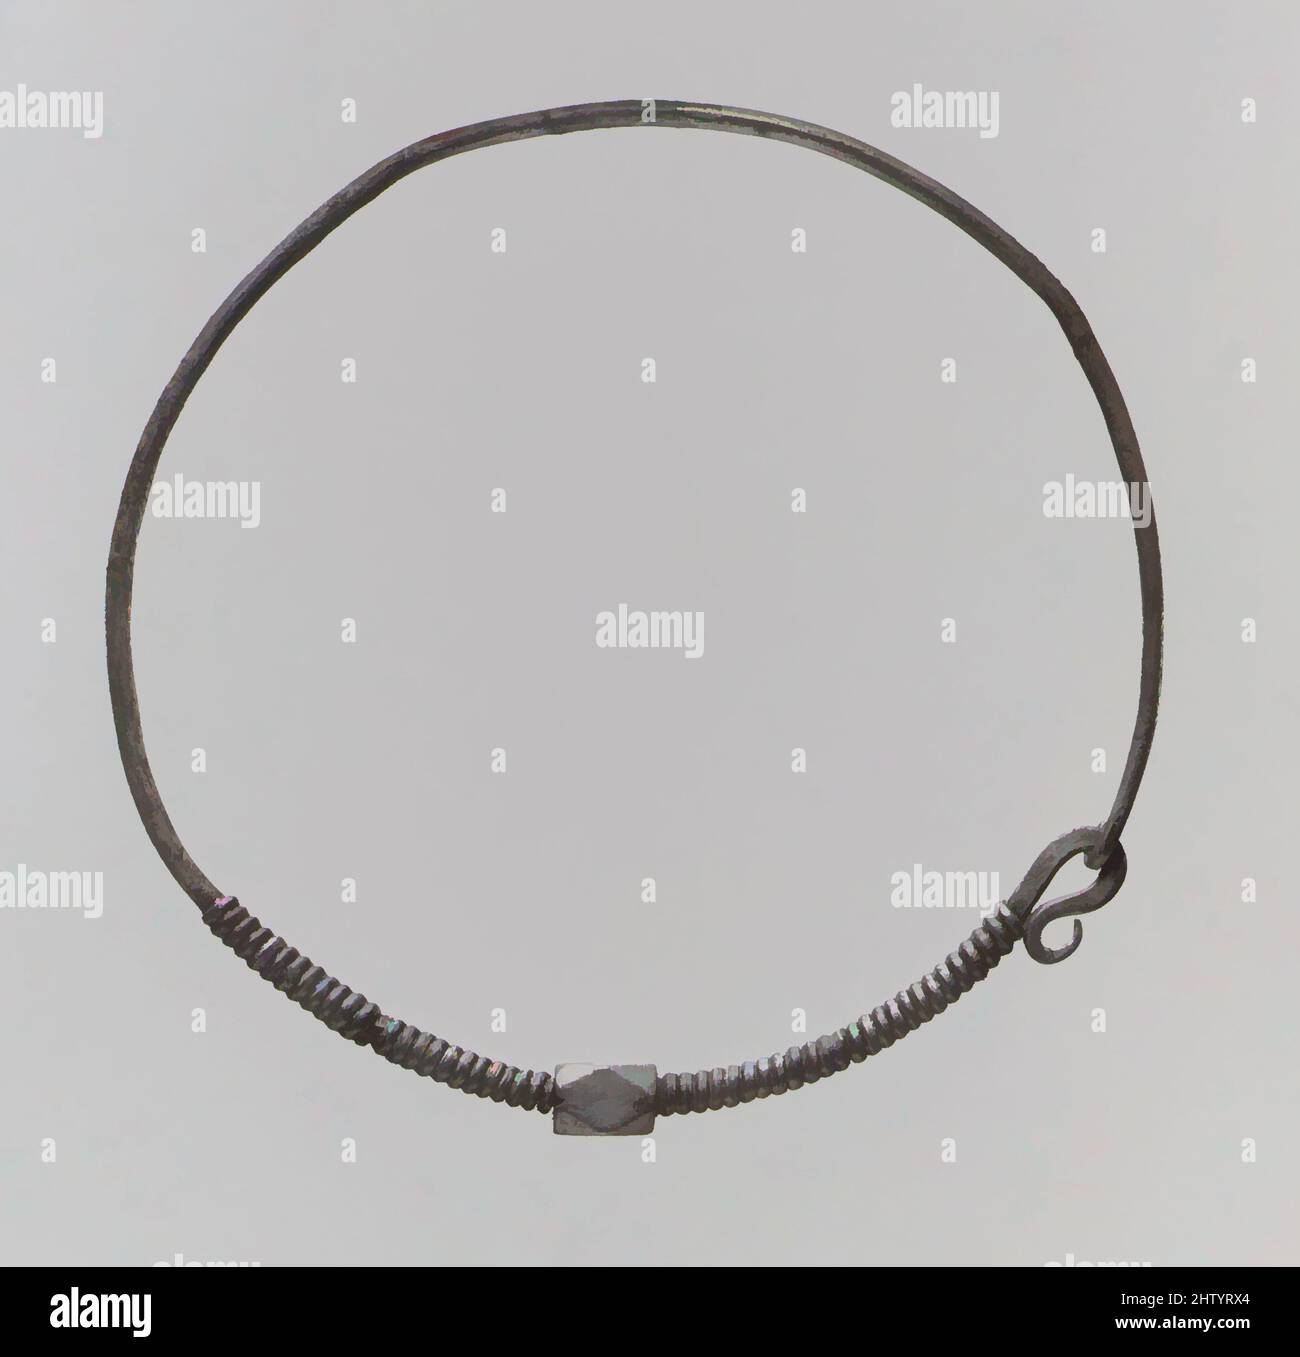 Art inspired by Earring, 675–725, Frankish, Silver, Overall: 3 3/8 x 1/4 in. (8.5 x 0.6 cm), Metalwork-Silver, Hoop earrings with polyhedral beads, derived from late Roman jewelry, remained fashionable among Frankish women from the 400s through the 700s. Many are delicate pieces, their, Classic works modernized by Artotop with a splash of modernity. Shapes, color and value, eye-catching visual impact on art. Emotions through freedom of artworks in a contemporary way. A timeless message pursuing a wildly creative new direction. Artists turning to the digital medium and creating the Artotop NFT Stock Photo